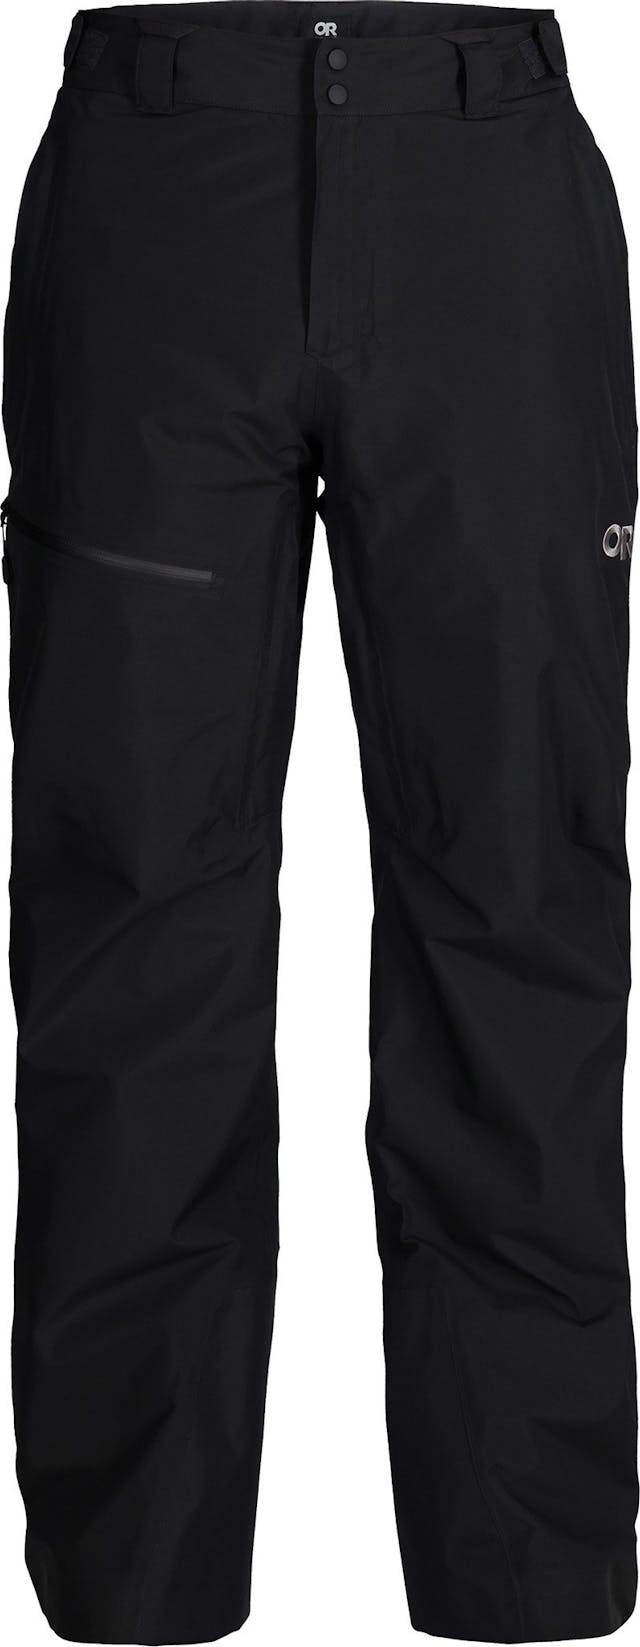 Product image for Tungsten II Pants - Men's